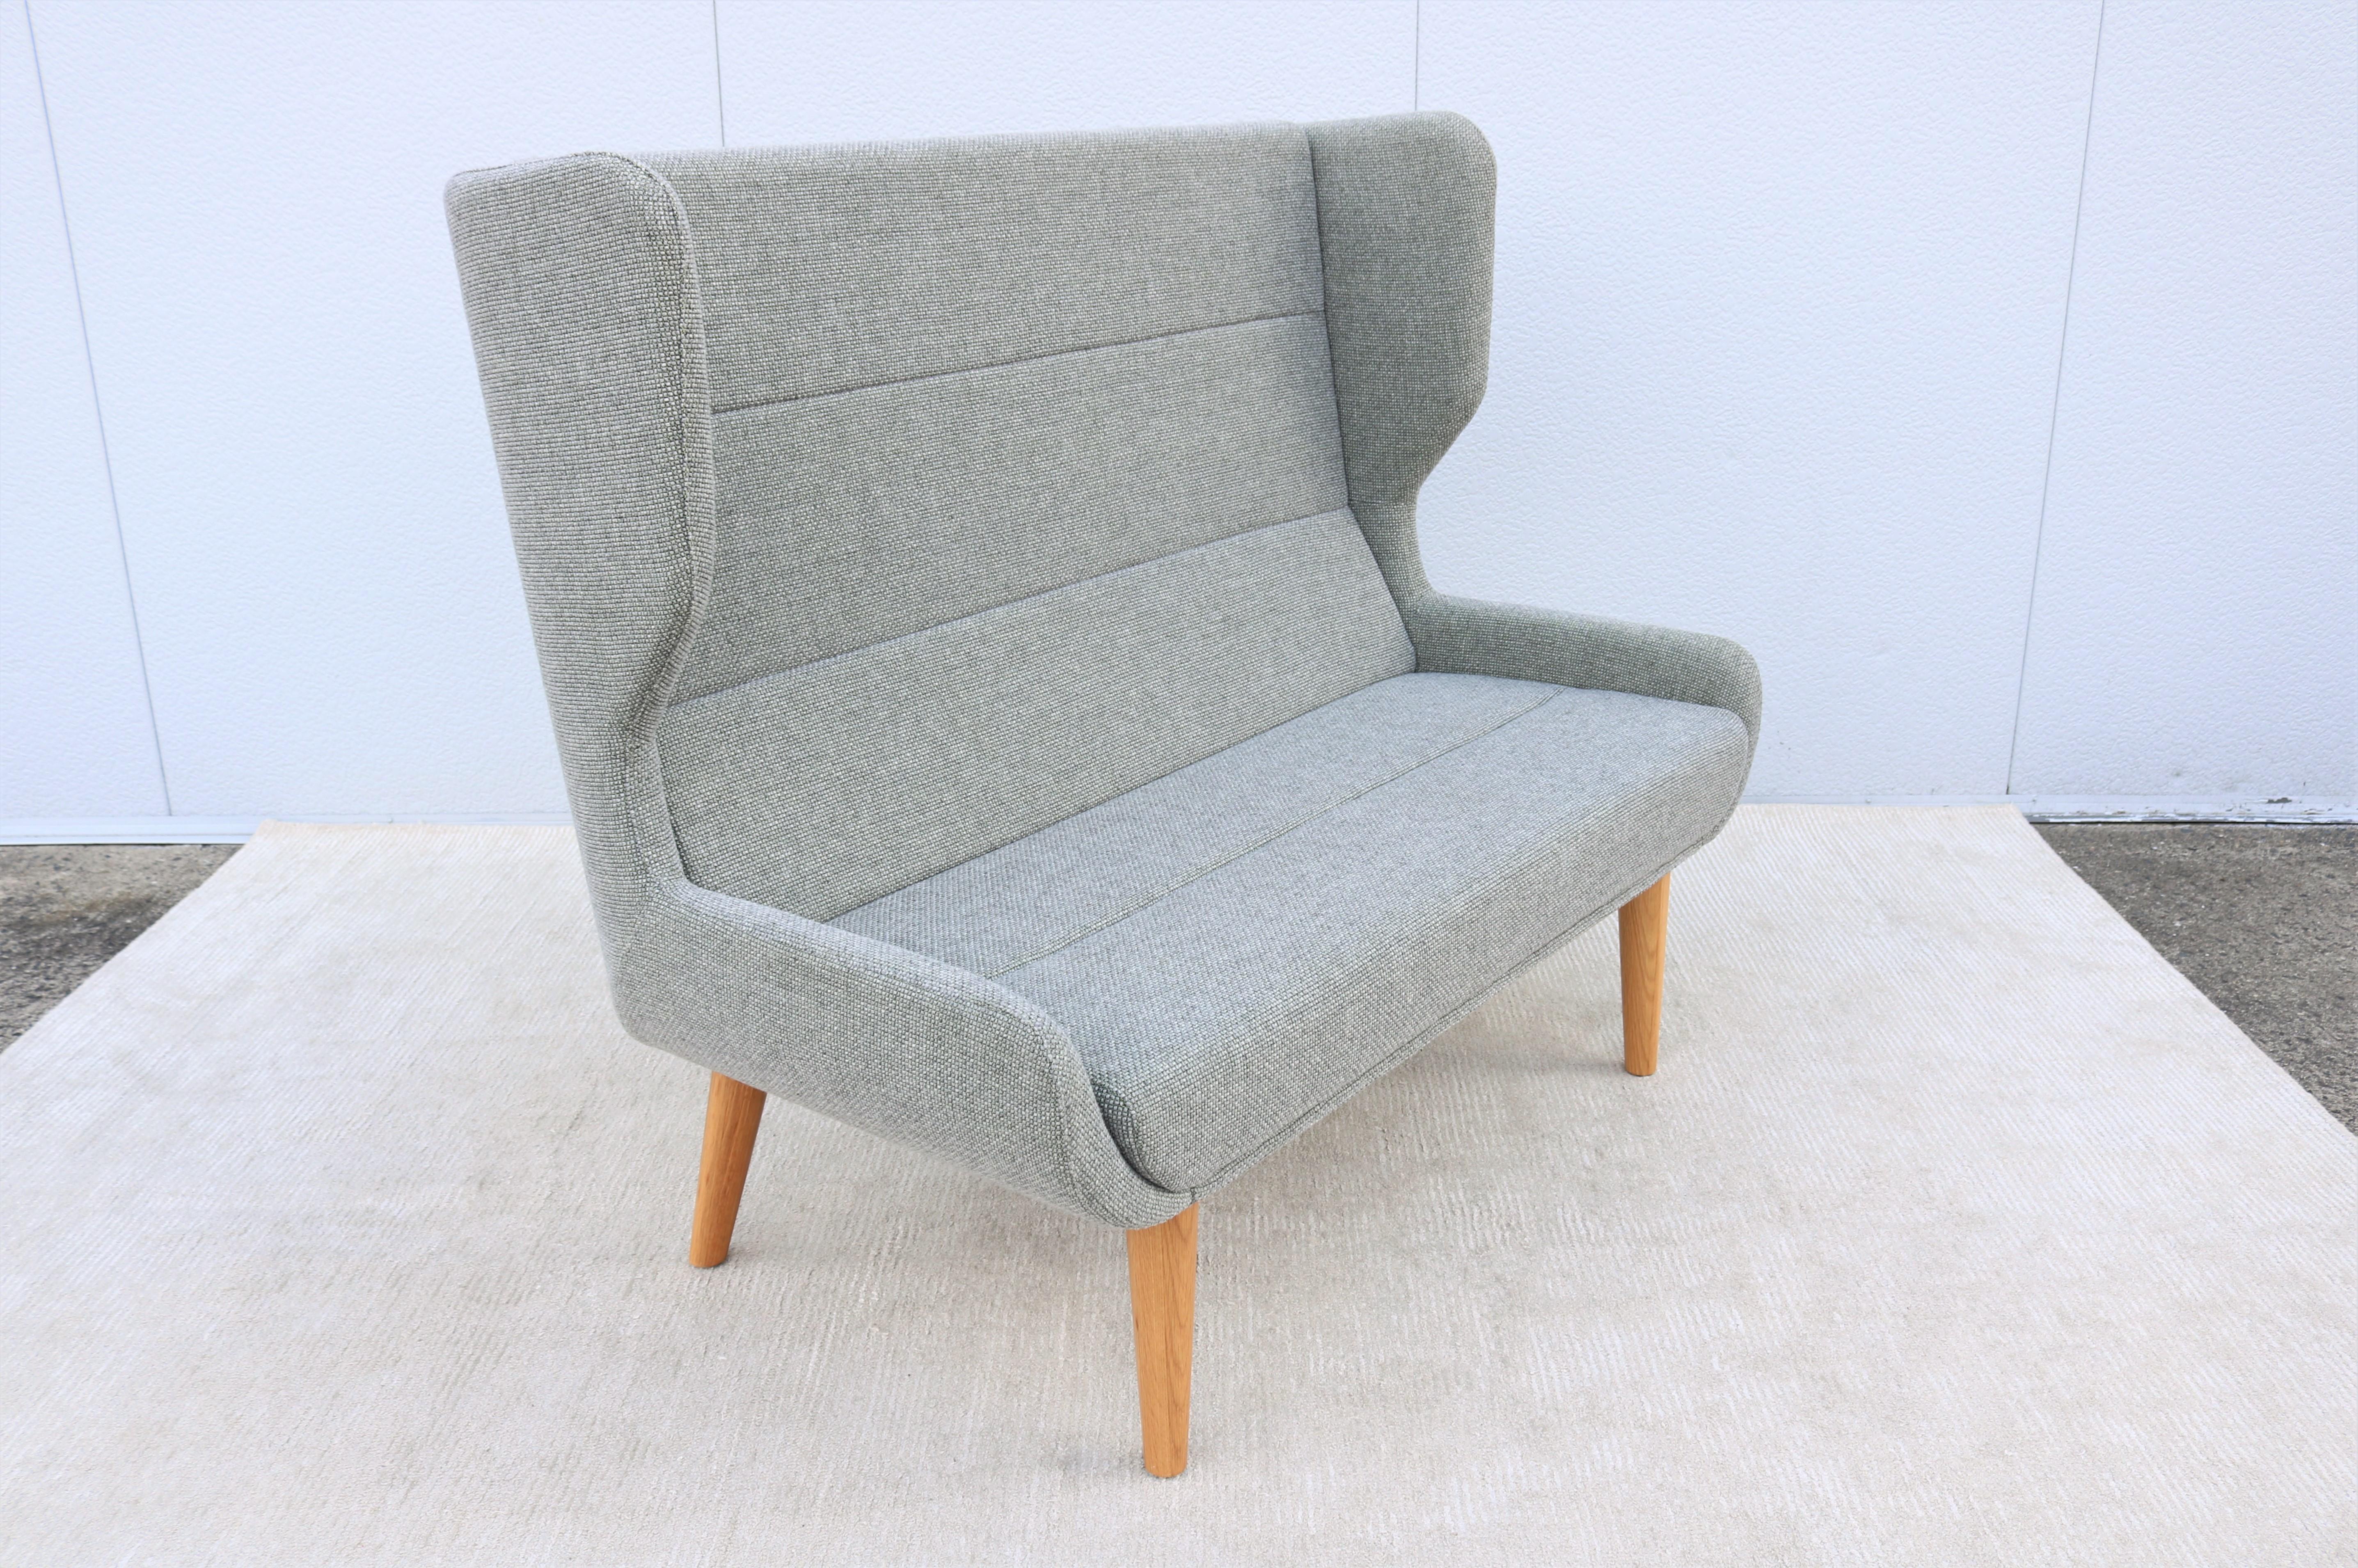 This fabulous high-back Hush two seat sofa takes inspiration from the classic wing-back chairs style.
Designed to be comfortable and supportive but with an upright positive seating position. 
A sleek and elegant design will complement any